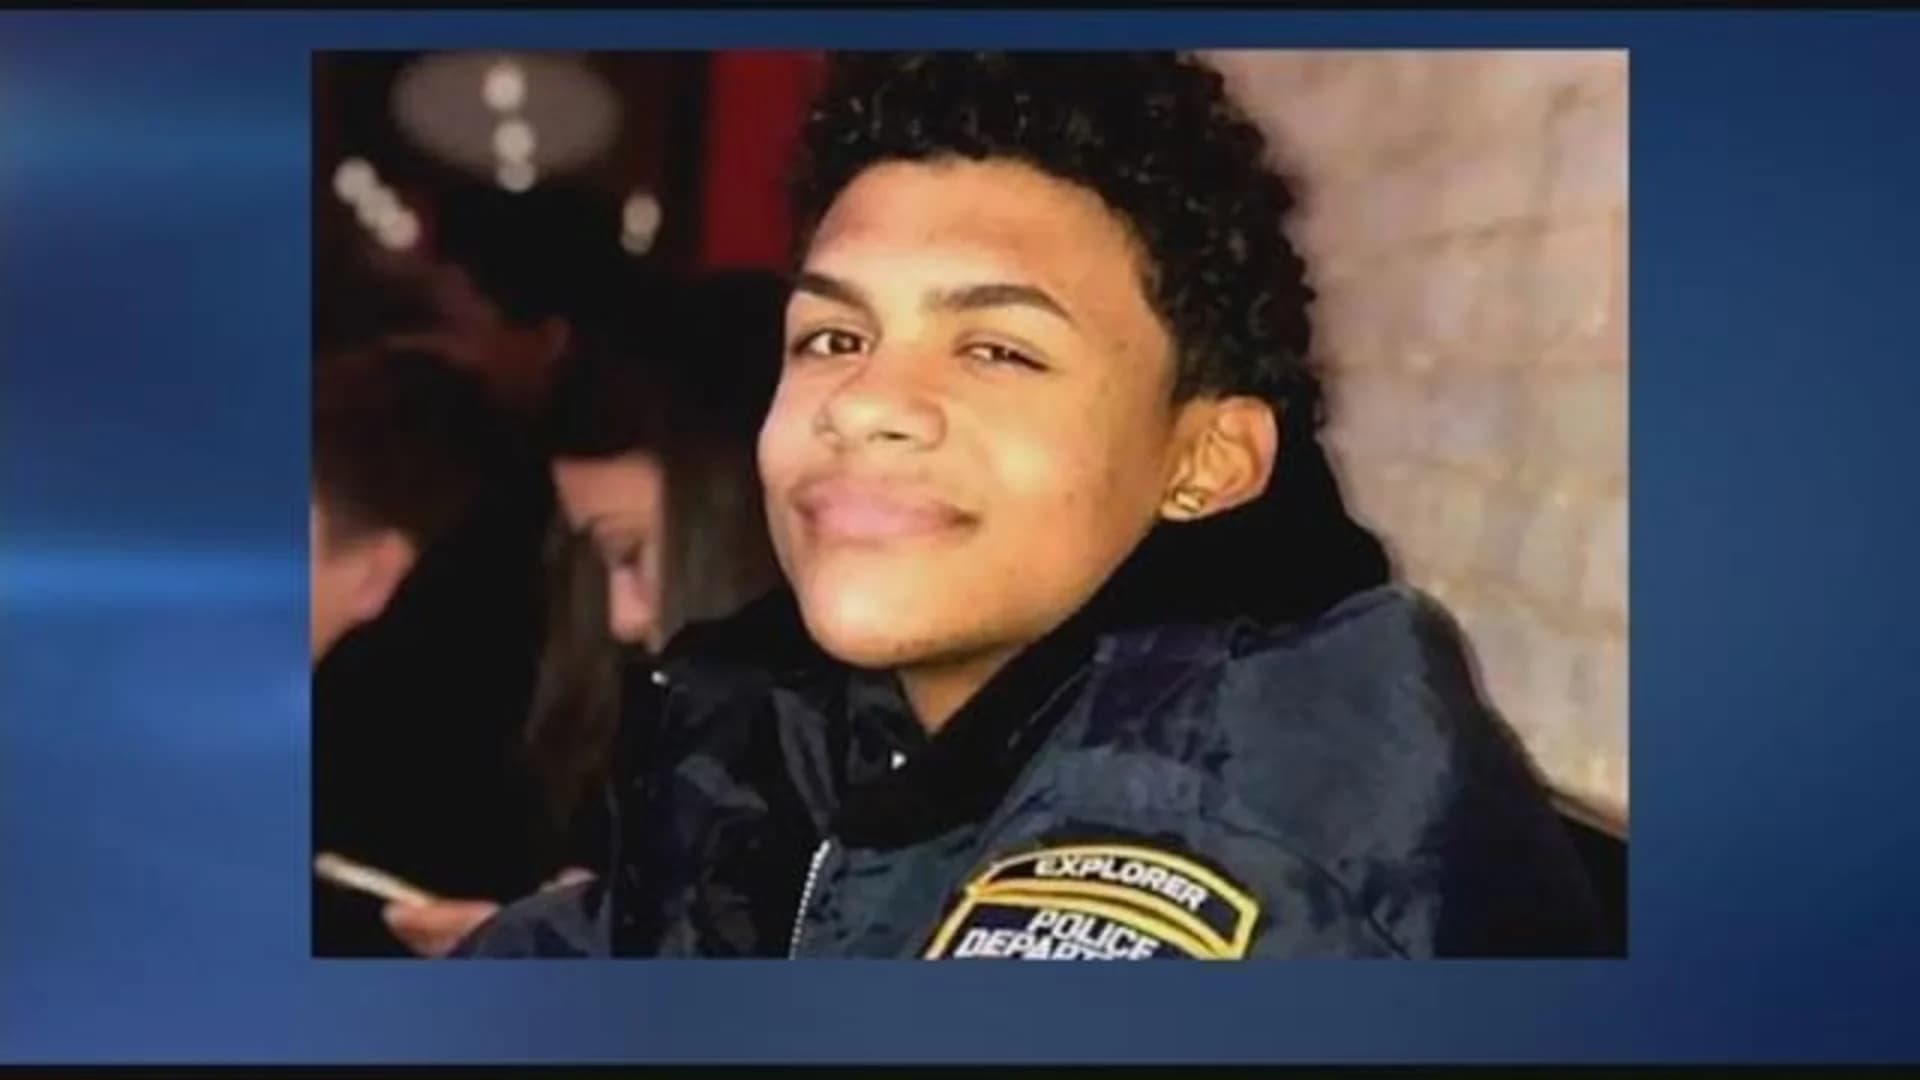 Remembering Junior 1 year after the Belmont teen’s murder